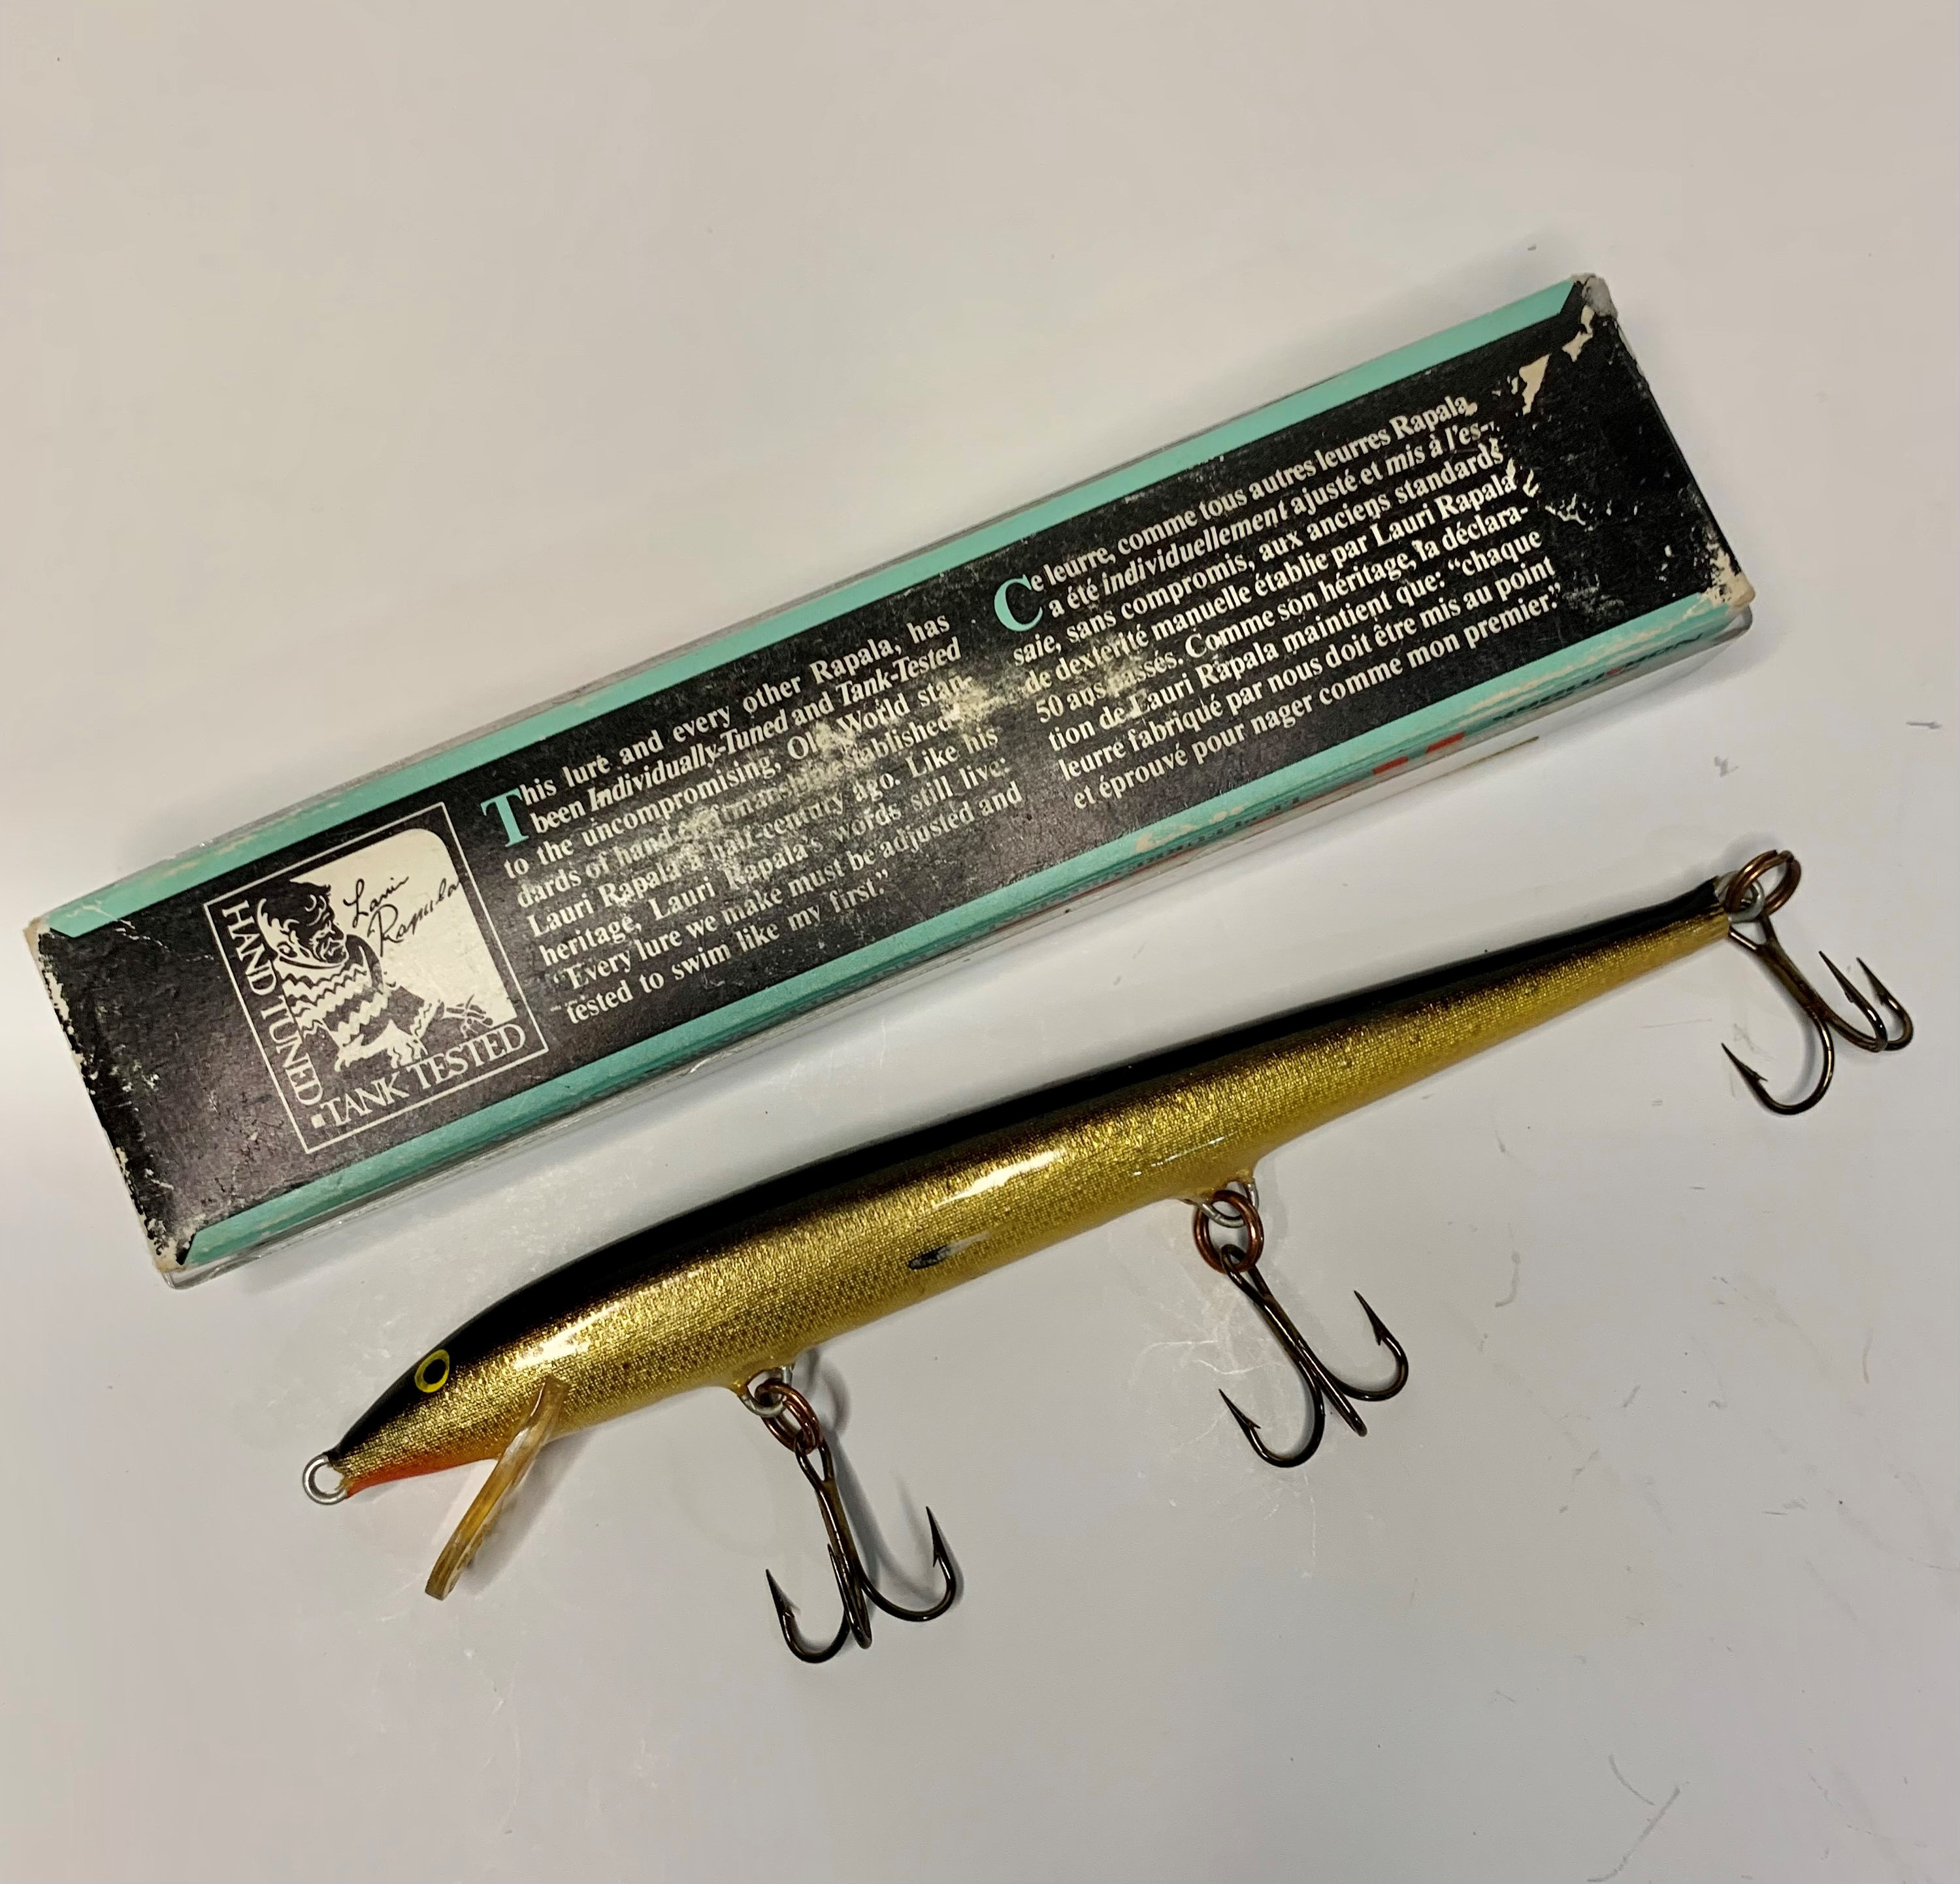 Original 1970 RAPALA FLOATING Fishing Lures Lot of 3 Manufactured in  Finland Vintage Tackle Stocking Stuffer for Him -  Denmark